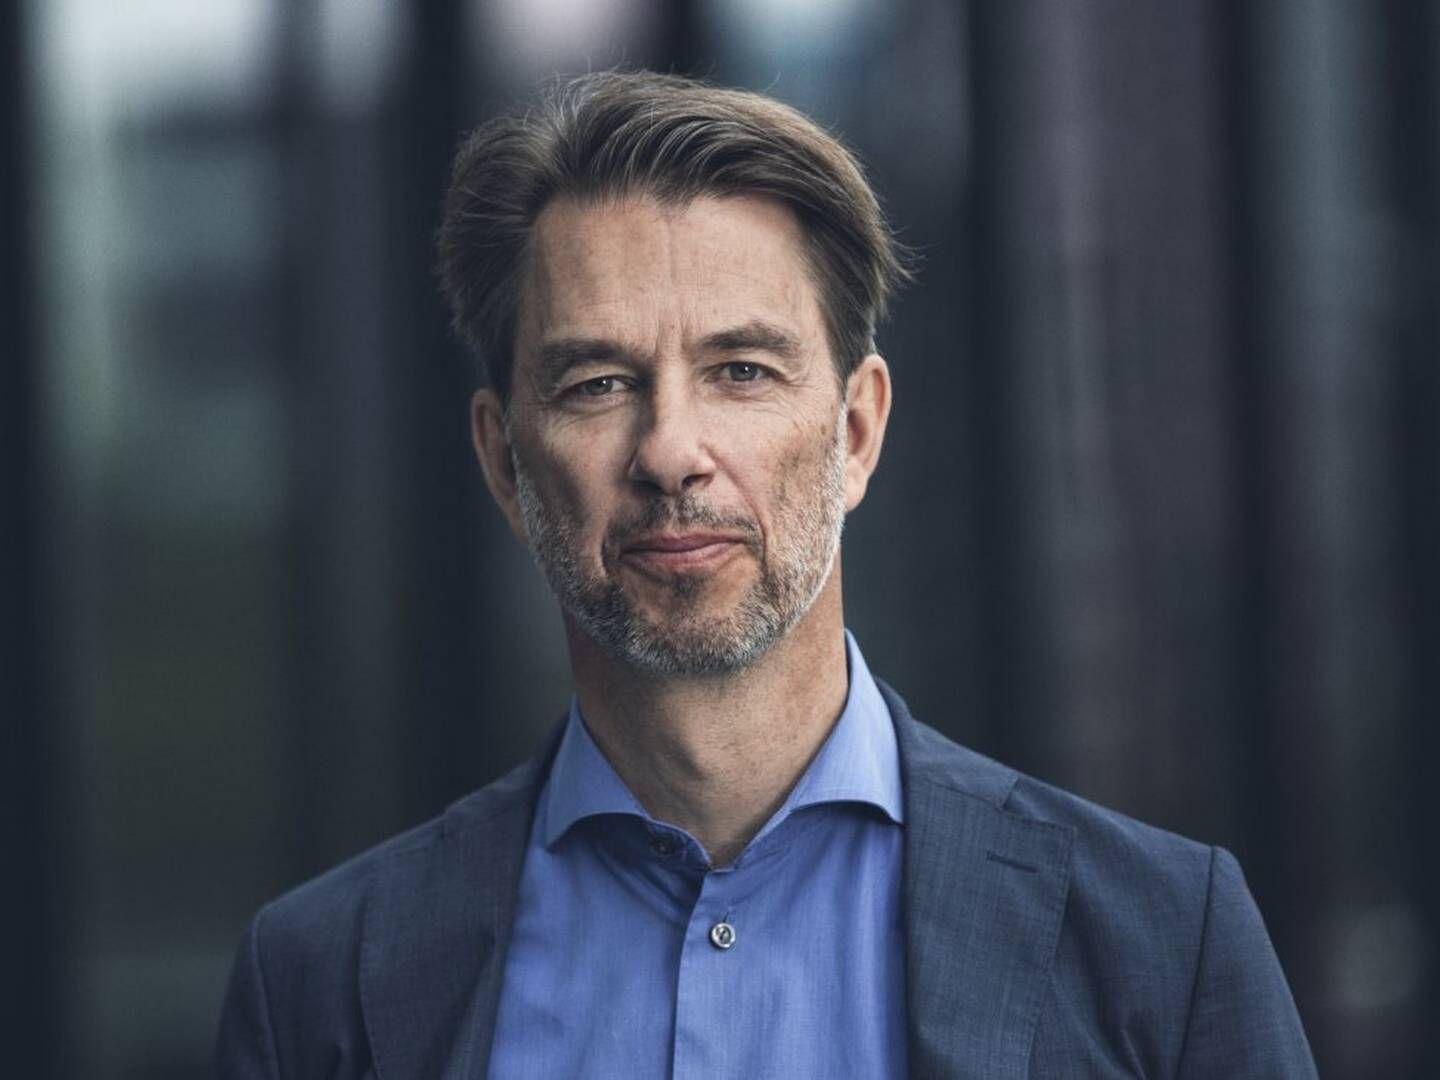 Nordea's head of responsible investment, Eric Pedersen, says the asset manager would rather maintain its holding in Tesla and engage with other shareholders on concerns over its CEO, Elon Musk. | Photo: PR / Nordea